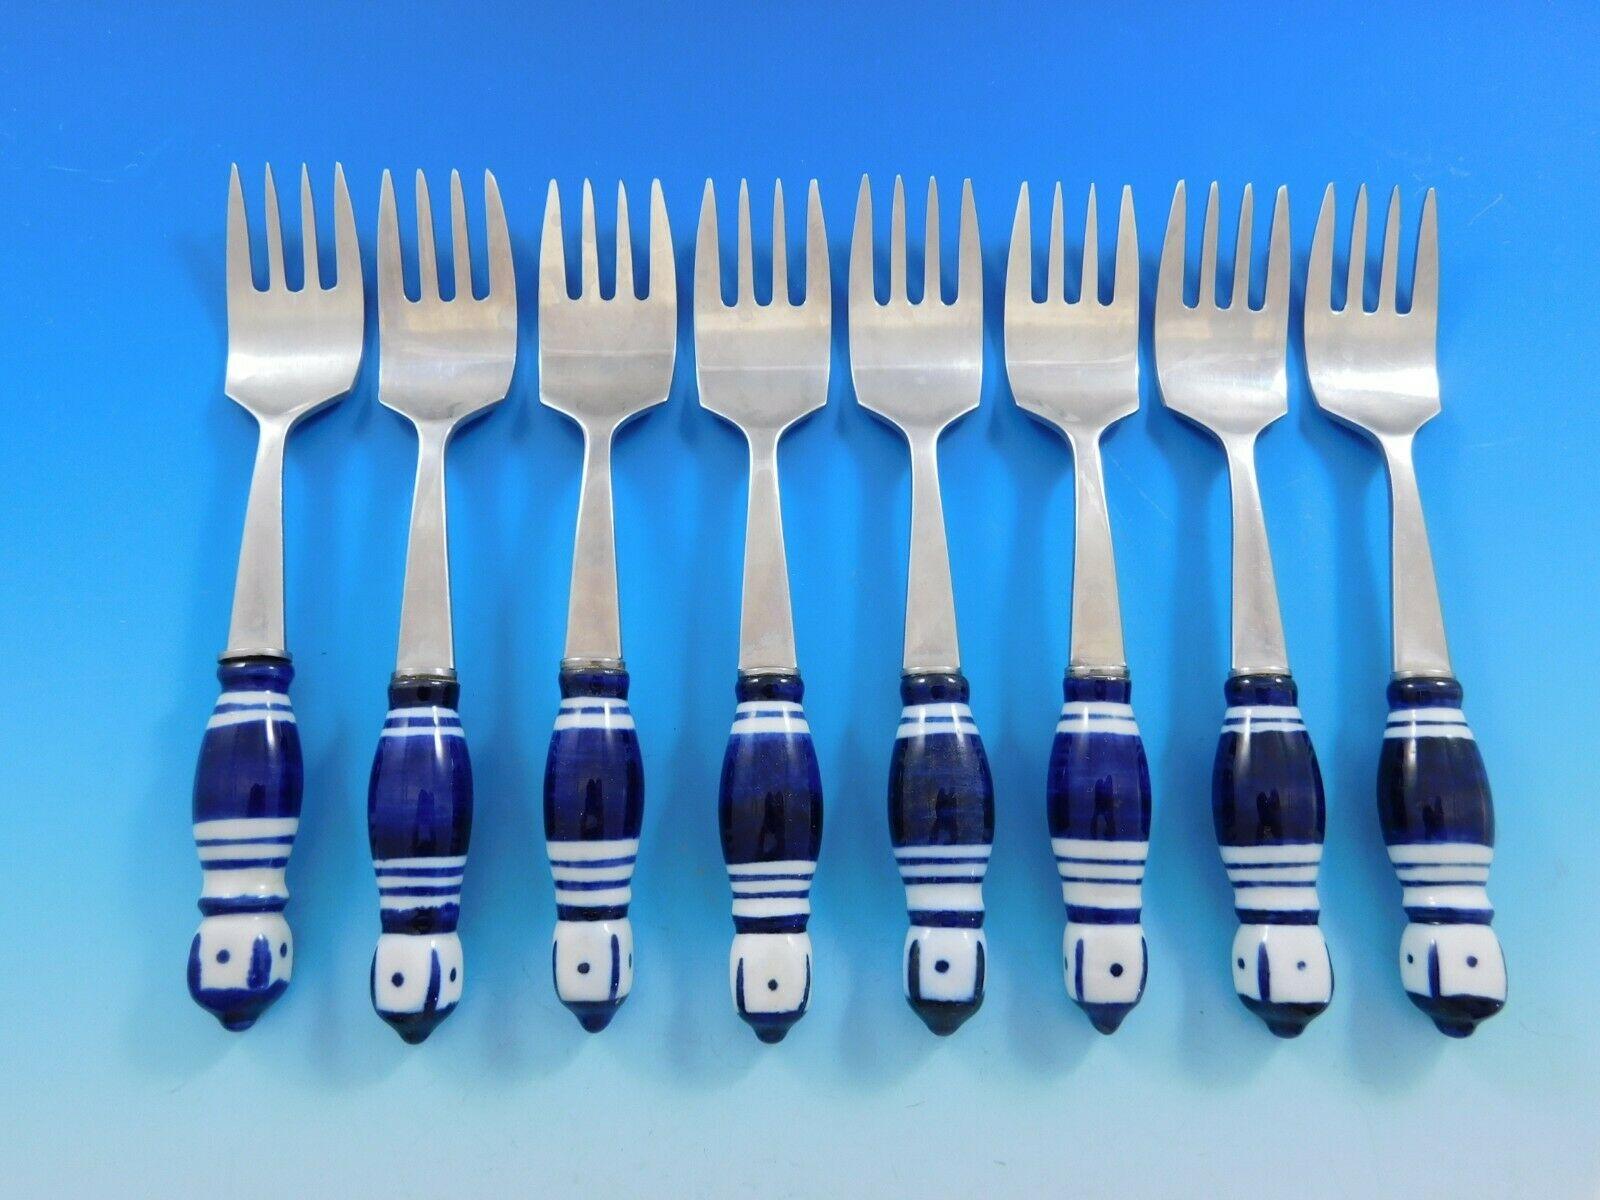 20th Century Grill Blue by Rosenthal Stainless and Porcelain Flatware Service Set 52 Pcs